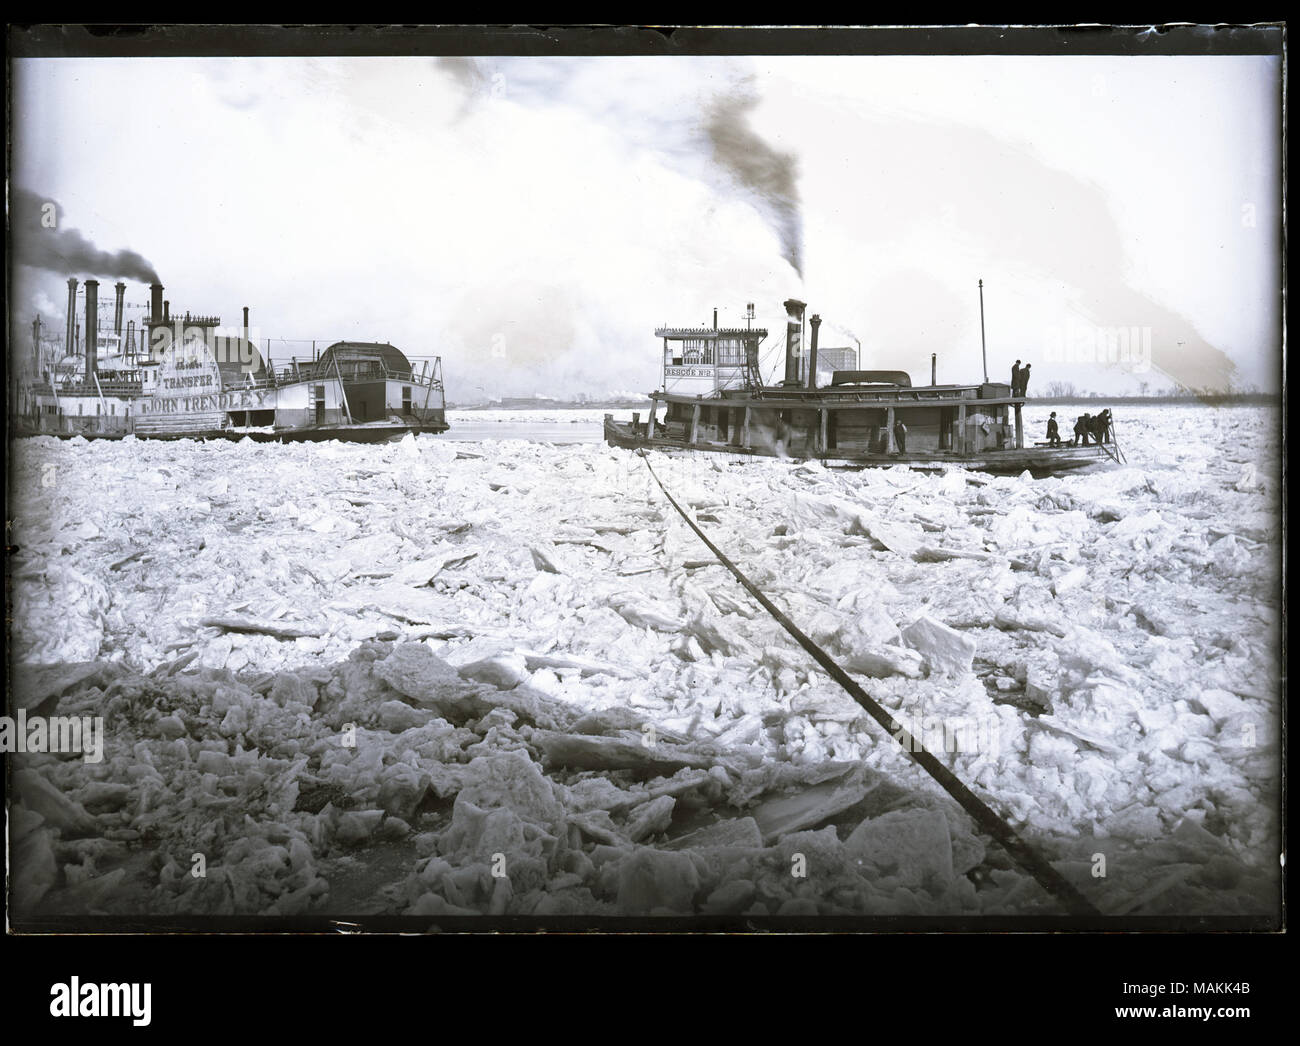 Horizontal, black and white photograph showing steamboats caught on an icy river, possibly during the ice gorge of 1887. The steamboat John Trendley, owned by the Wiggins Ferry Company, is on the left, with an unidentified steamboat behind it. These steamboats appear to be trapped in the ice. On the right, there is a boat named Rescue No. 2, with a rope running from the boat's deck into the foreground. Several men are standing on the boat's deck, using poles or other long tools. The path in front of Rescue No. 2 appears blocked by ice, and there are ice chunks throughout the foreground. Title: Stock Photo